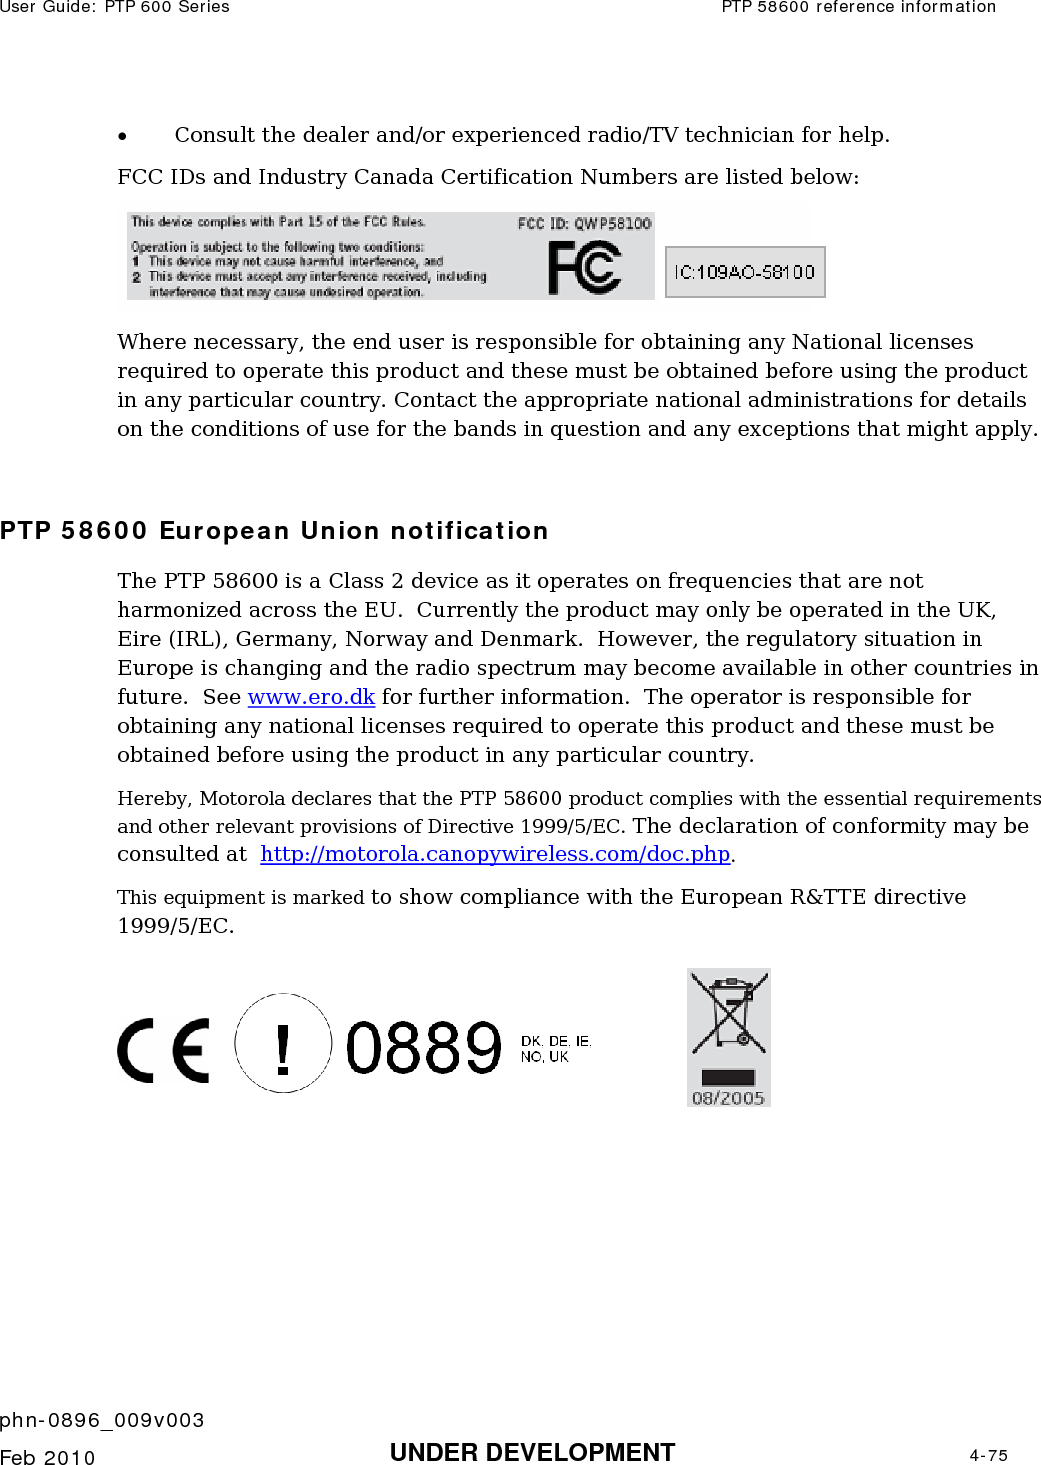 User Guide: PTP 600 Series  PTP 58600 reference information    phn-0896_009v003   Feb 2010  UNDER DEVELOPMENT  4-75  • Consult the dealer and/or experienced radio/TV technician for help. FCC IDs and Industry Canada Certification Numbers are listed below:  Where necessary, the end user is responsible for obtaining any National licenses required to operate this product and these must be obtained before using the product in any particular country. Contact the appropriate national administrations for details on the conditions of use for the bands in question and any exceptions that might apply.  PTP 58600 European Union notification The PTP 58600 is a Class 2 device as it operates on frequencies that are not harmonized across the EU.  Currently the product may only be operated in the UK, Eire (IRL), Germany, Norway and Denmark.  However, the regulatory situation in Europe is changing and the radio spectrum may become available in other countries in future.  See www.ero.dk for further information.  The operator is responsible for obtaining any national licenses required to operate this product and these must be obtained before using the product in any particular country. Hereby, Motorola declares that the PTP 58600 product complies with the essential requirements and other relevant provisions of Directive 1999/5/EC. The declaration of conformity may be consulted at  http://motorola.canopywireless.com/doc.php. This equipment is marked to show compliance with the European R&amp;TTE directive 1999/5/EC.   